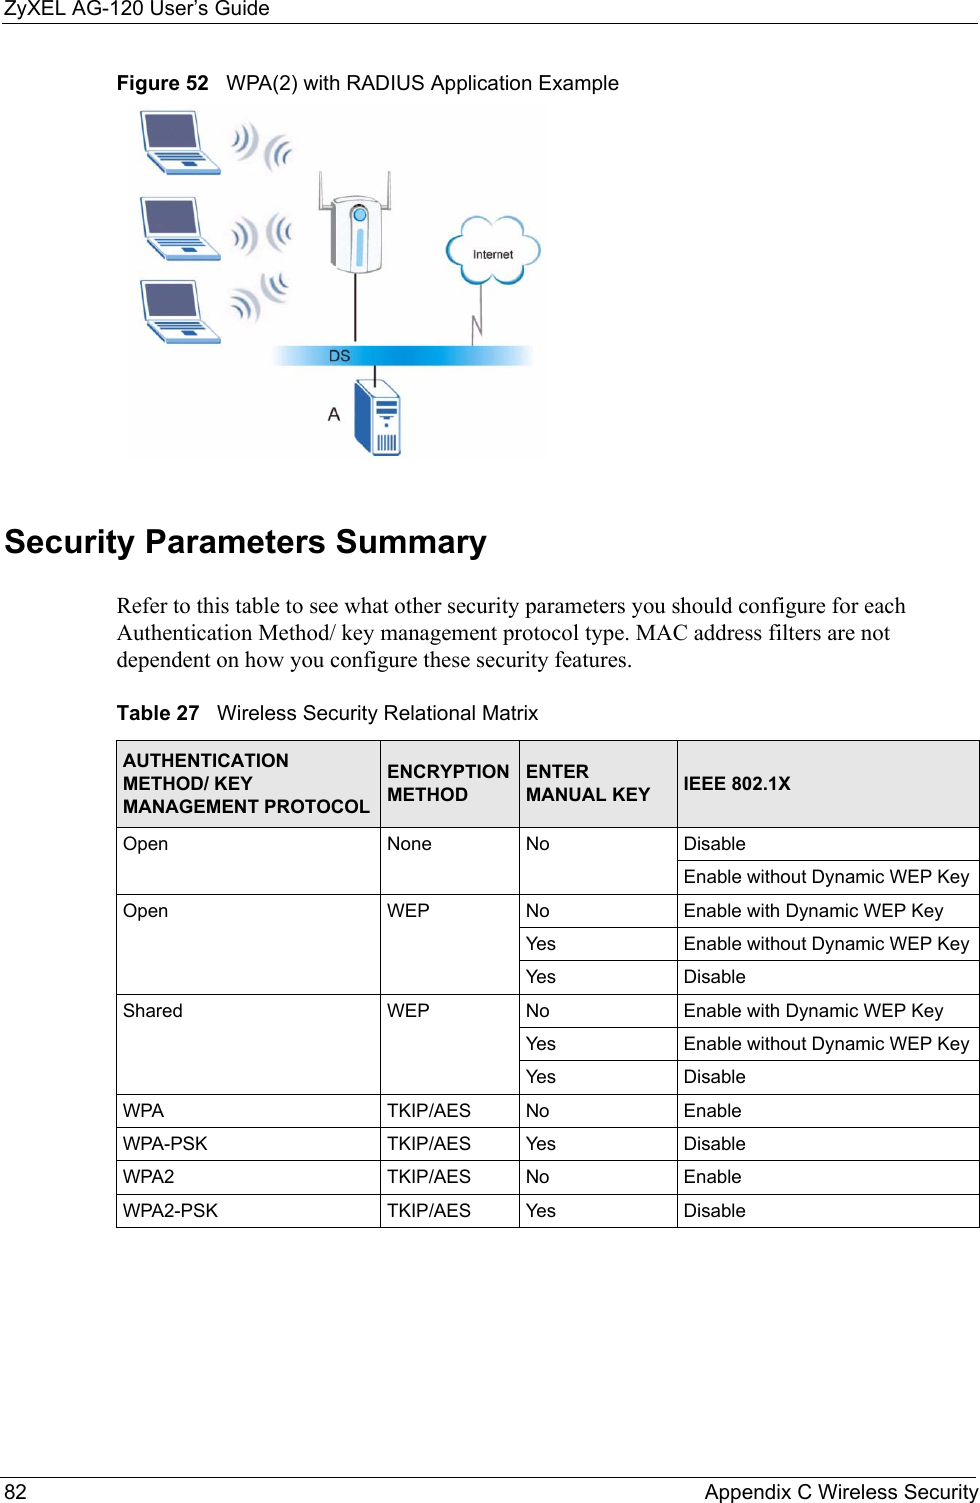 ZyXEL AG-120 User’s Guide82 Appendix C Wireless SecurityFigure 52   WPA(2) with RADIUS Application ExampleSecurity Parameters SummaryRefer to this table to see what other security parameters you should configure for each Authentication Method/ key management protocol type. MAC address filters are not dependent on how you configure these security features.Table 27   Wireless Security Relational MatrixAUTHENTICATION METHOD/ KEY MANAGEMENT PROTOCOLENCRYPTION METHODENTER MANUAL KEY IEEE 802.1XOpen None No DisableEnable without Dynamic WEP KeyOpen WEP No           Enable with Dynamic WEP KeyYes Enable without Dynamic WEP KeyYes DisableShared WEP  No           Enable with Dynamic WEP KeyYes Enable without Dynamic WEP KeyYes DisableWPA  TKIP/AES No EnableWPA-PSK  TKIP/AES Yes DisableWPA2 TKIP/AES No EnableWPA2-PSK  TKIP/AES Yes Disable